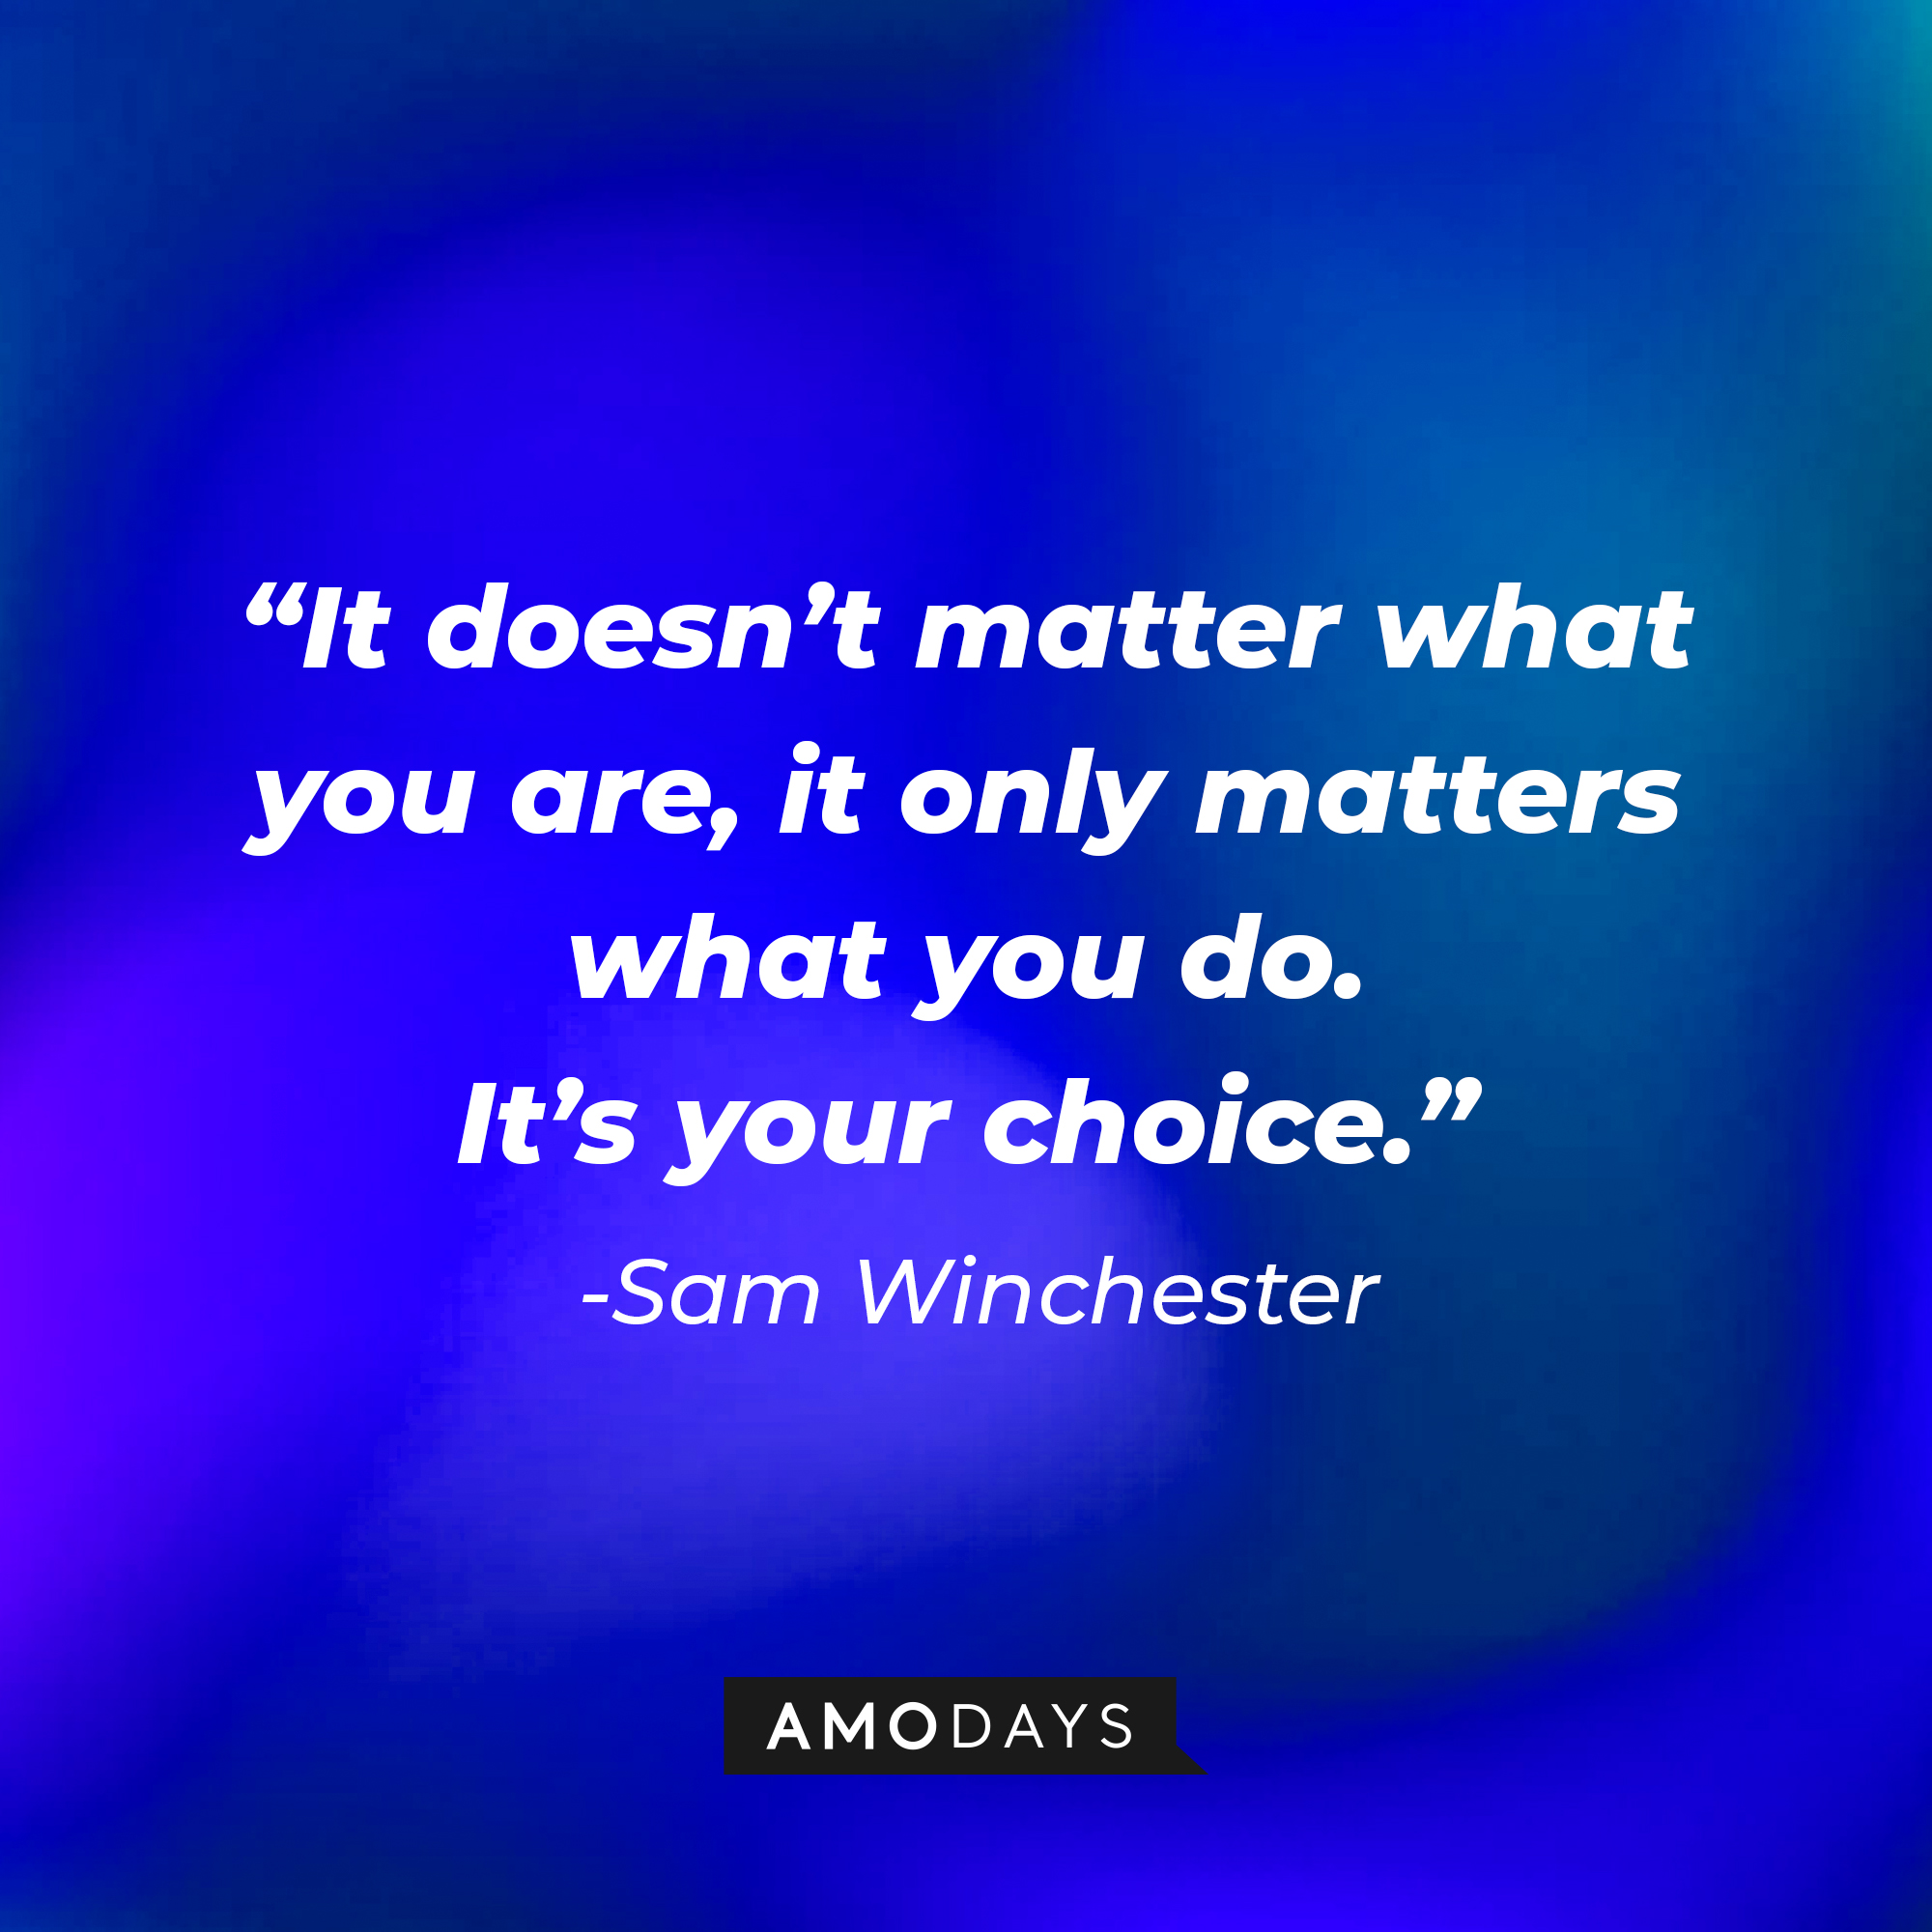 Sam Winchester’s quote: “It doesn’t matter what you are, it only matters what you do. It’s your choice.”  | Source: AmoDays